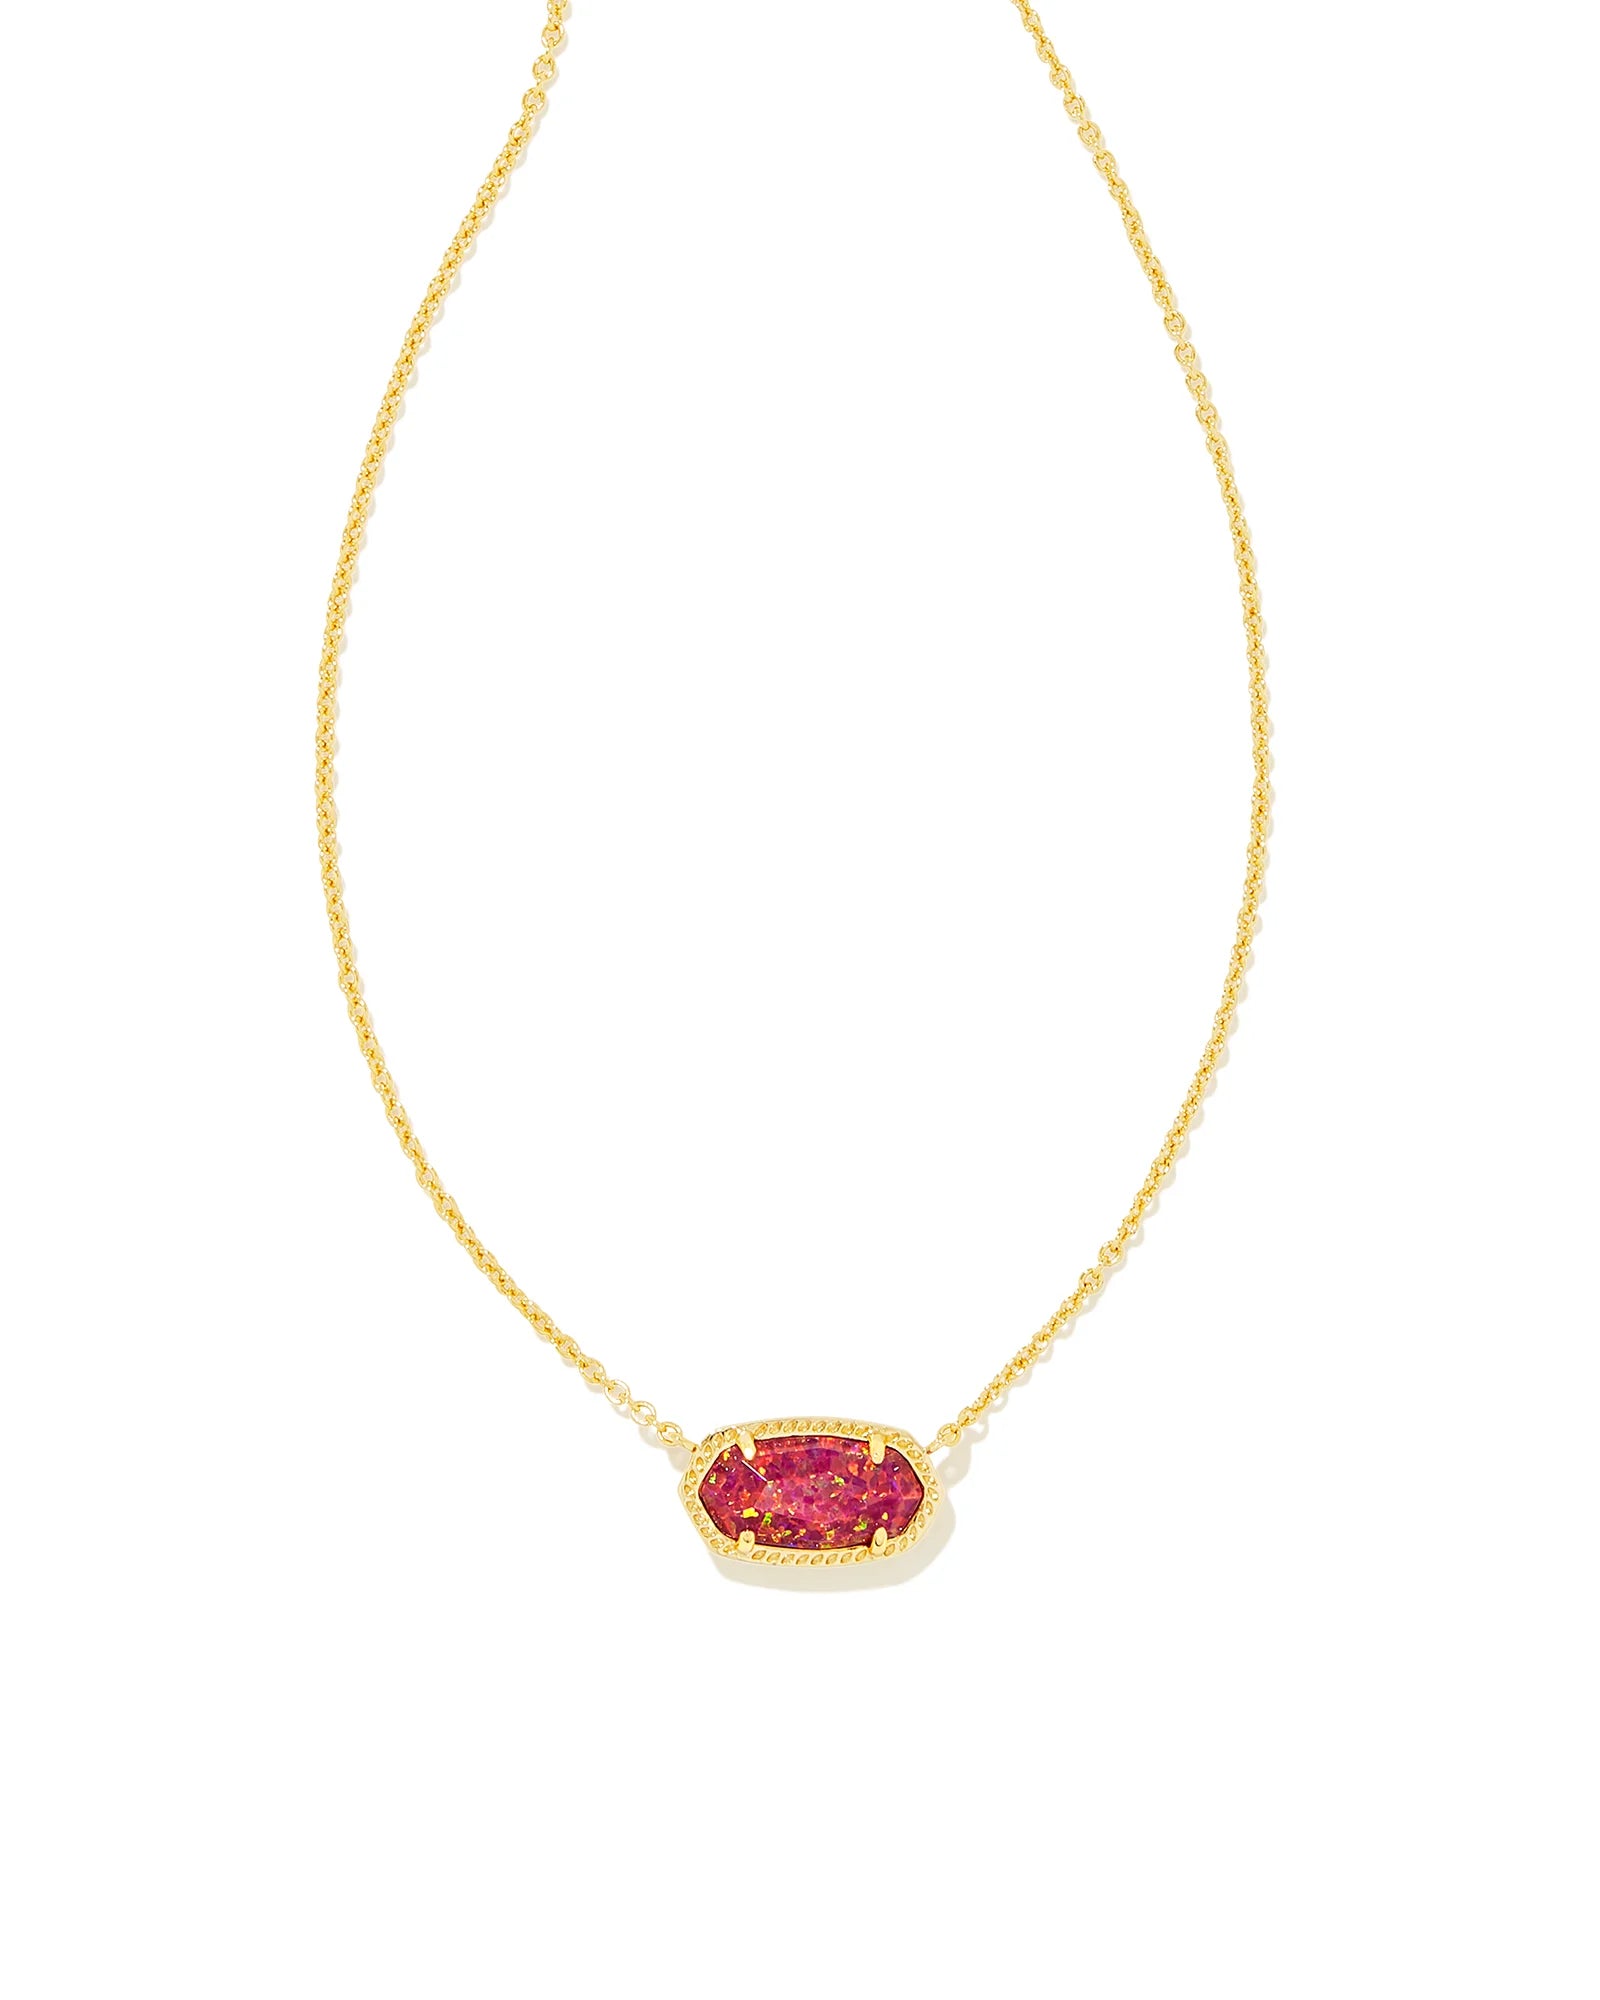 Kendra Scott Elisa Gold Pendant Necklace in Spice Drusy – Specialty Design  Company